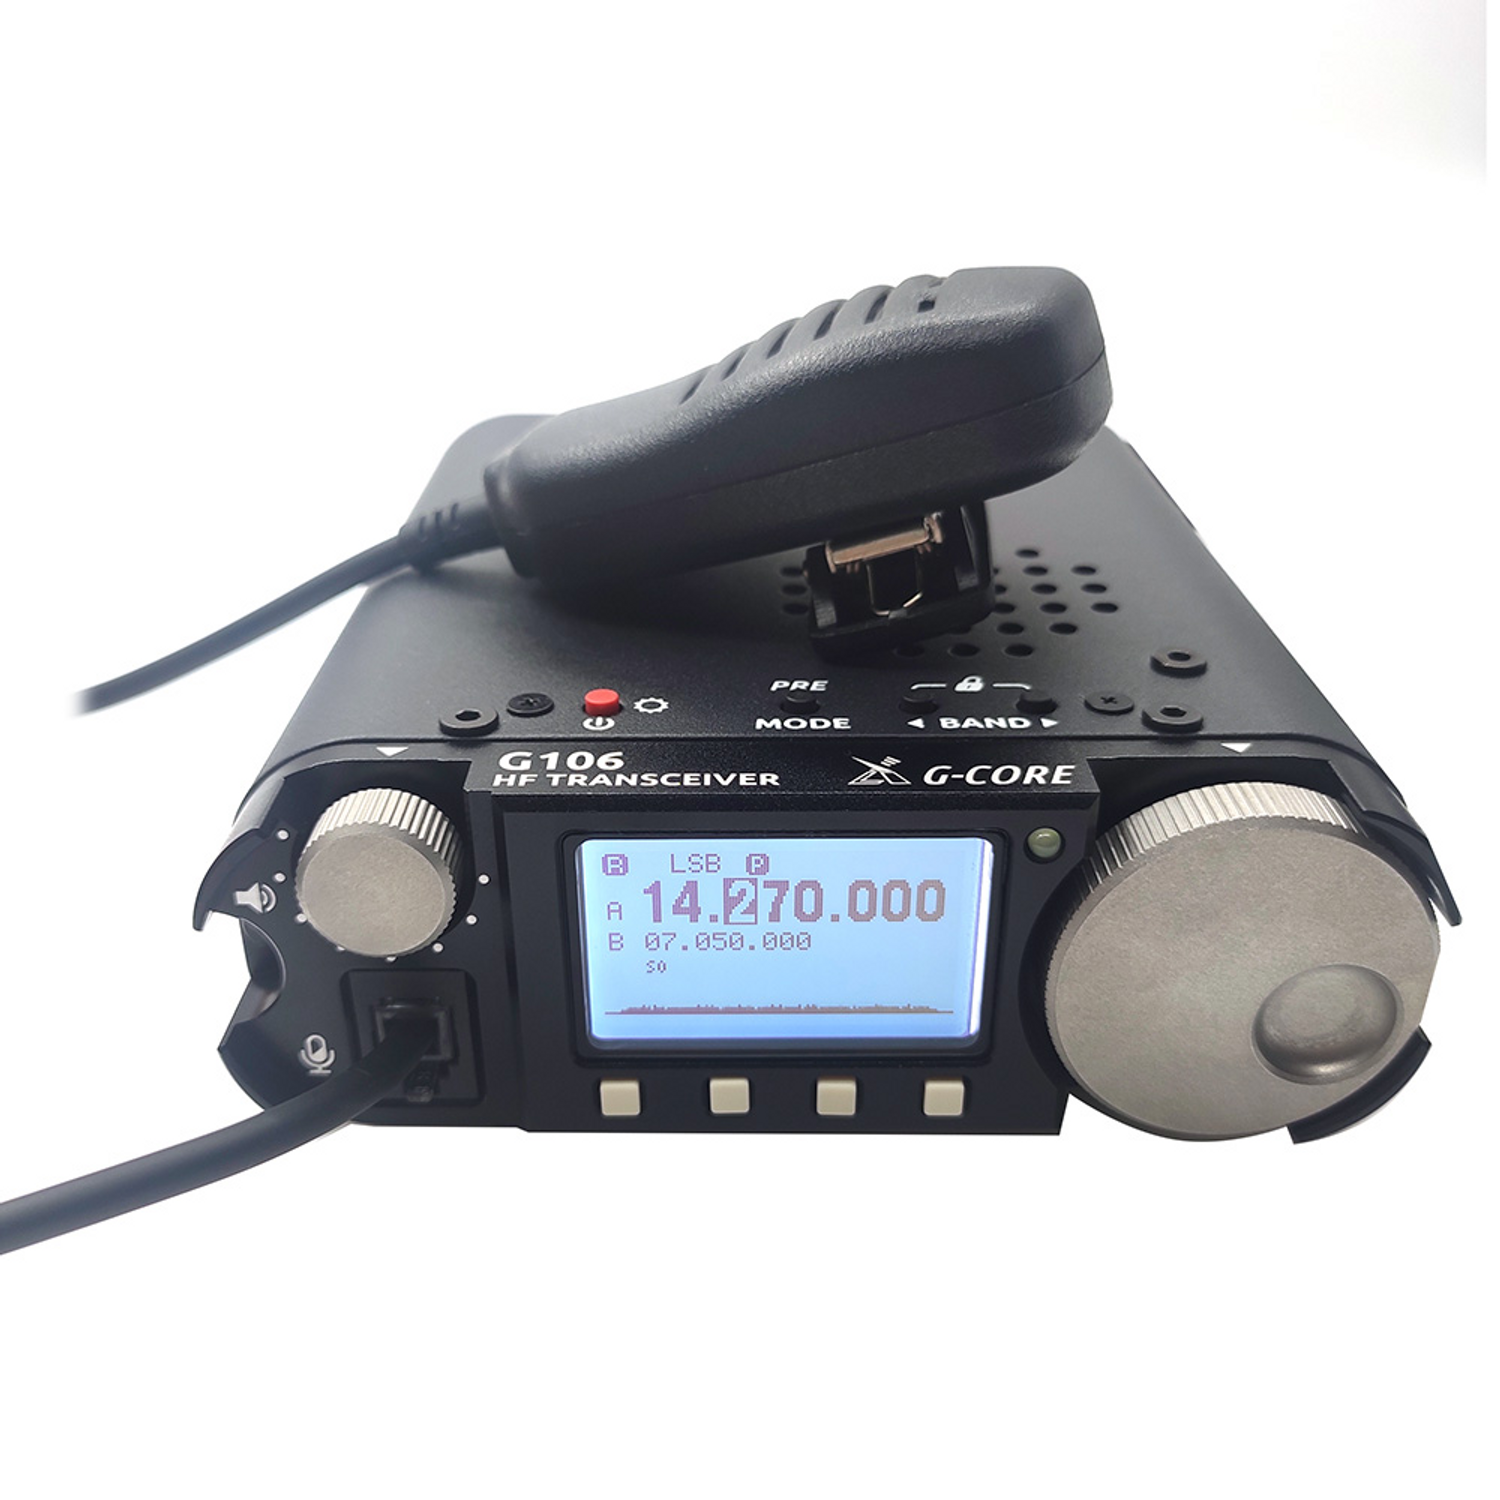 Xiegu G106 portable HF transceiver with a hand microphone on top